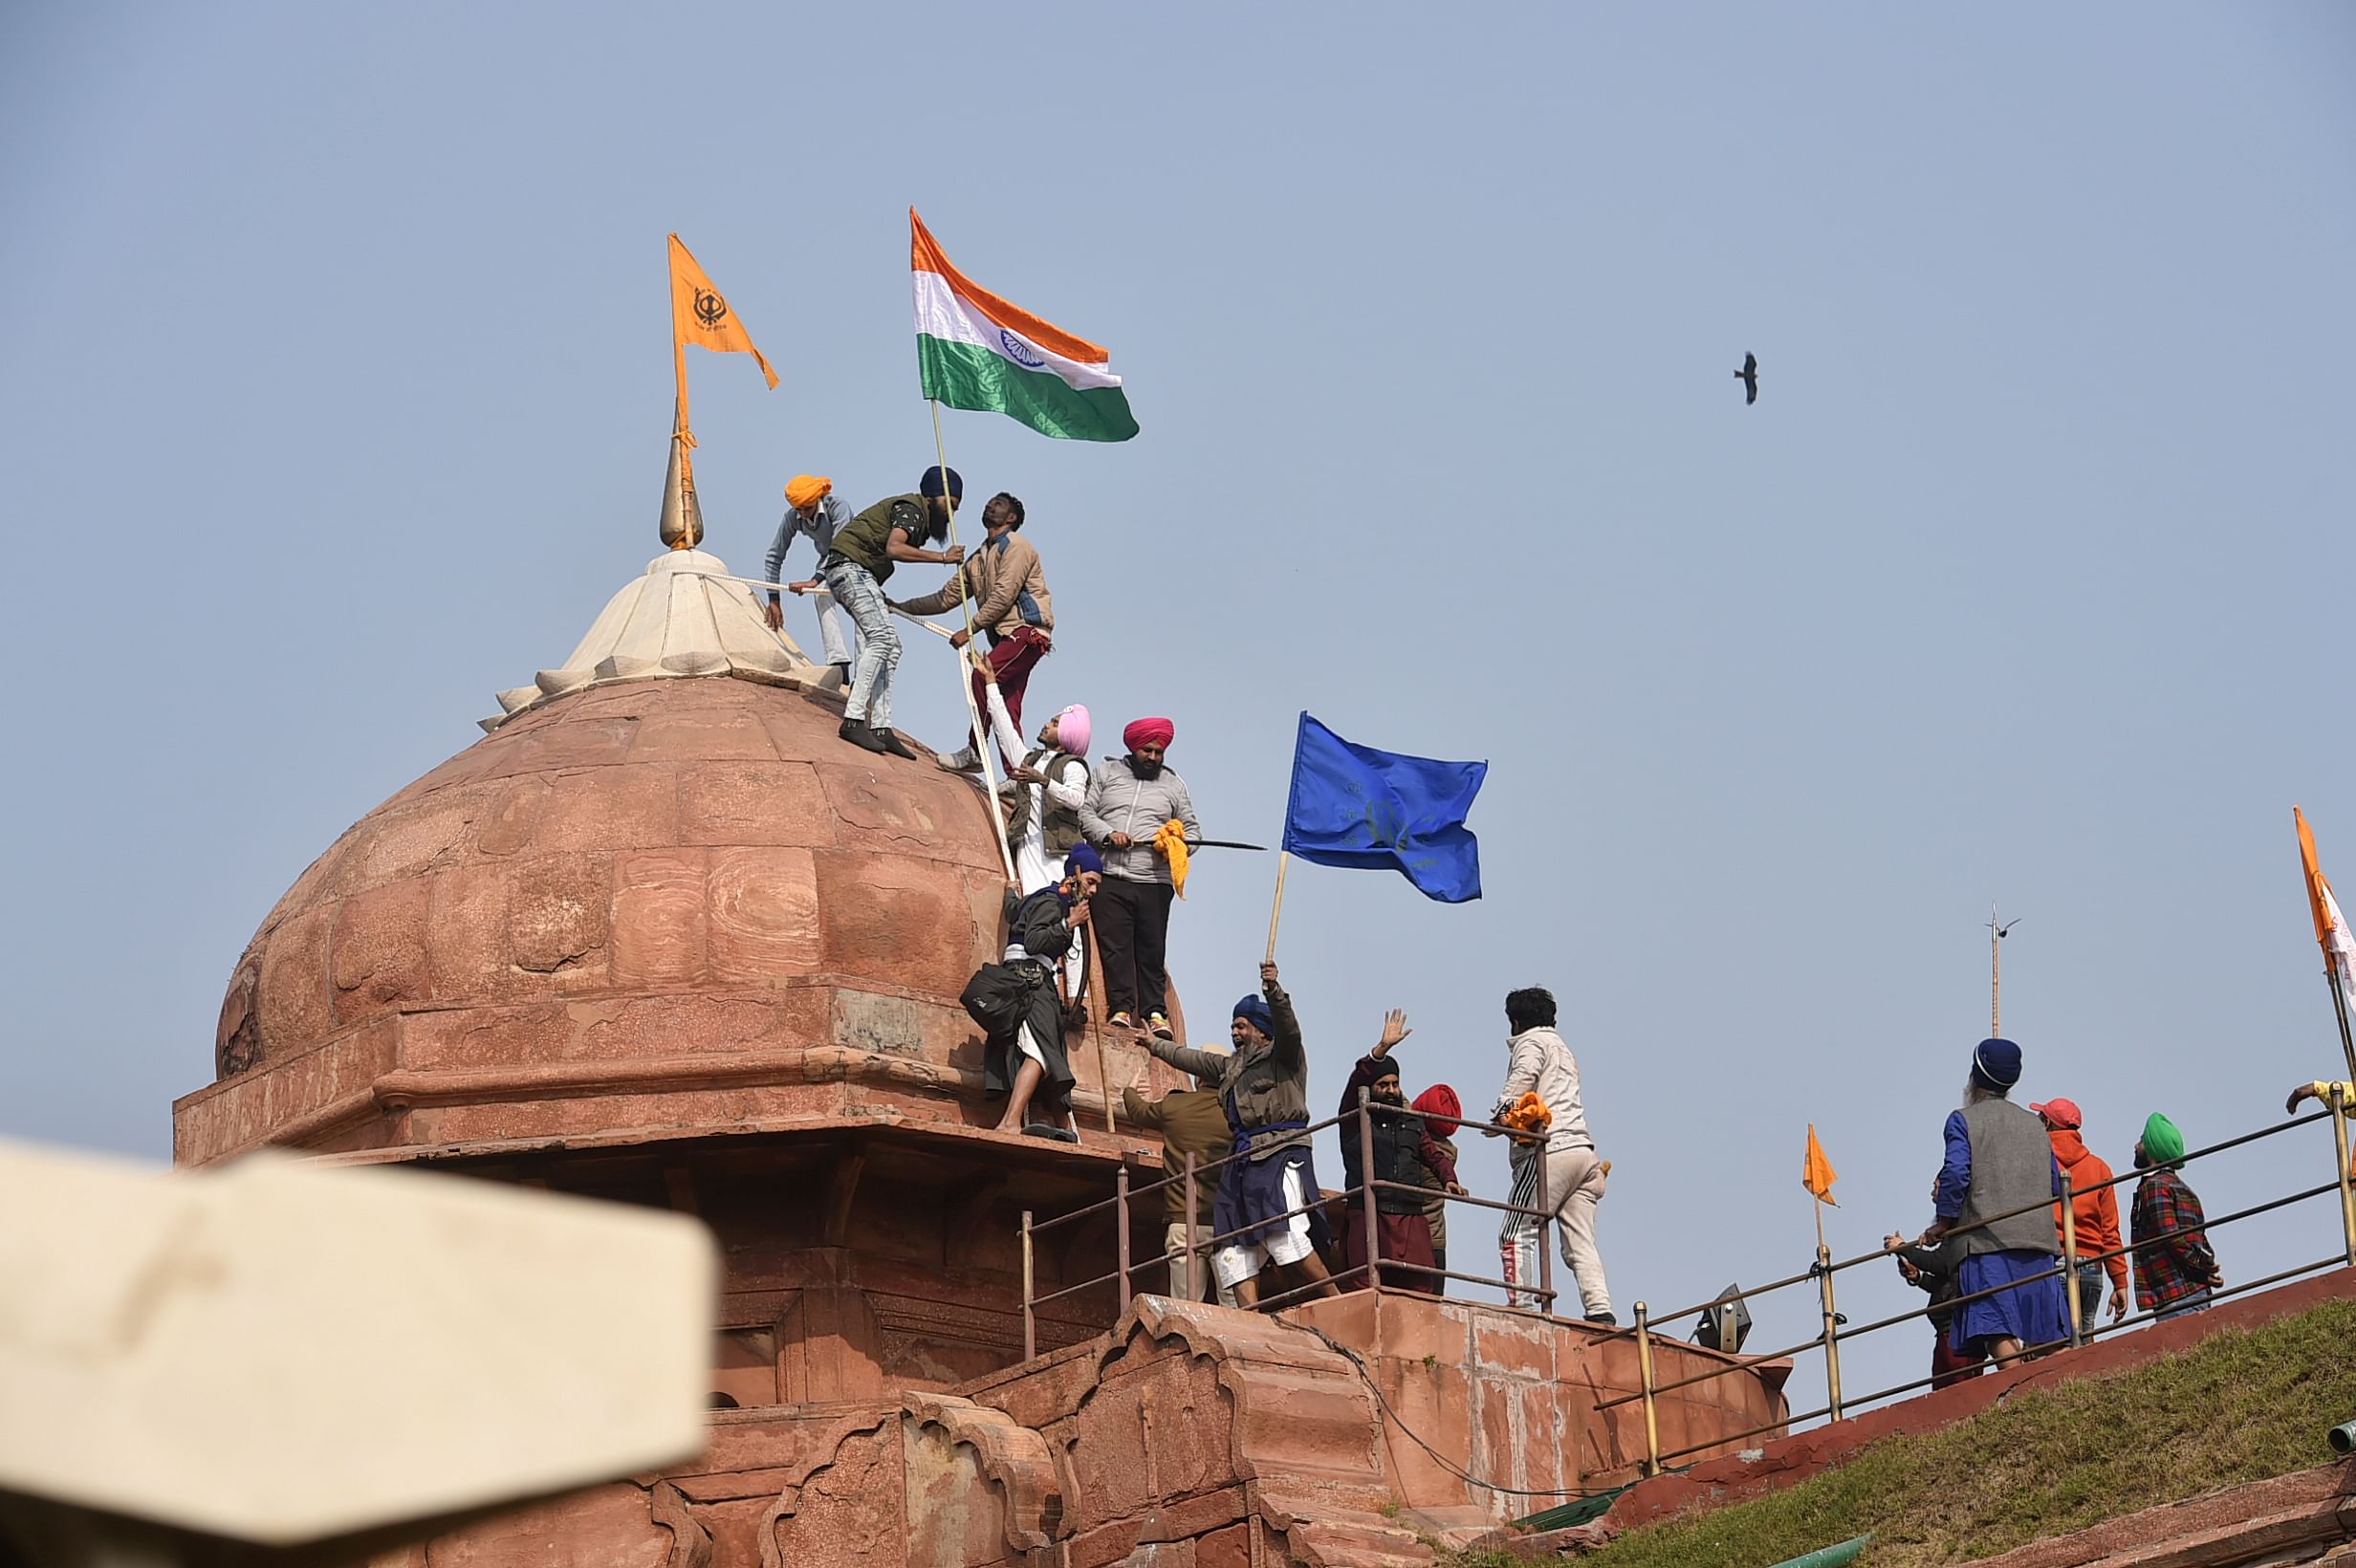  Farmers post flags on a dome of Red Fort after their tractor parade on Republic Day, in New Delhi, Tuesday, Jan. 26, 2021. Farmers have been agitating against new farm laws. Credit: PTI Photo